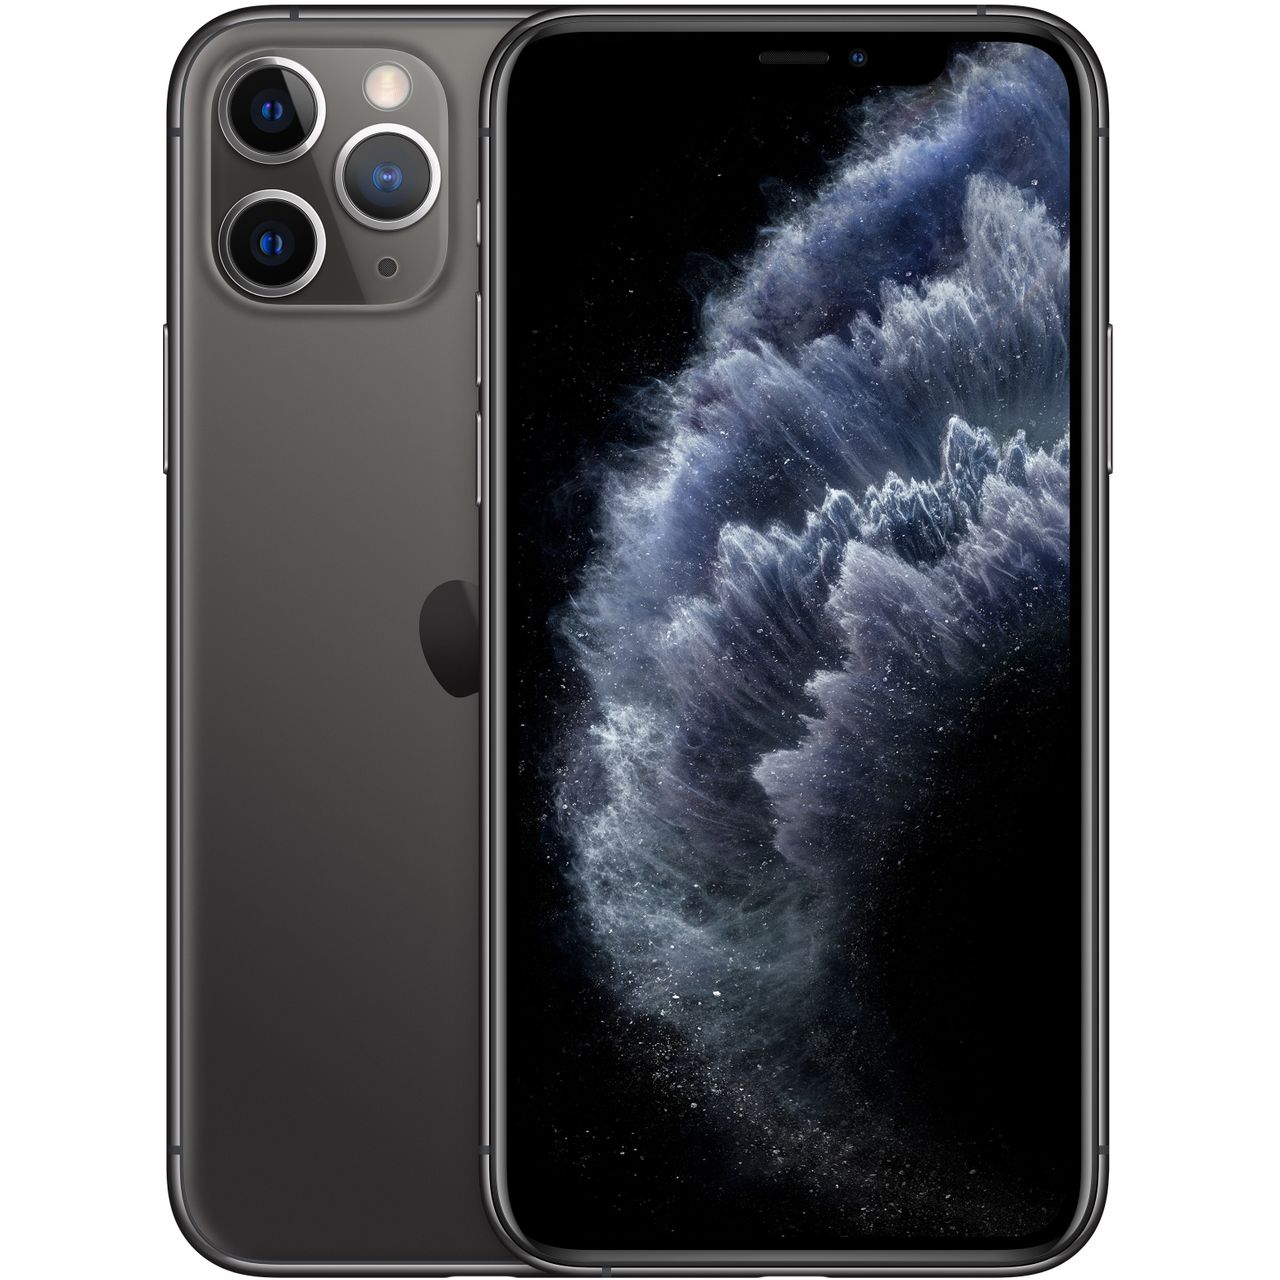 Apple iPhone 11 Pro 512GB in Space Grey Review